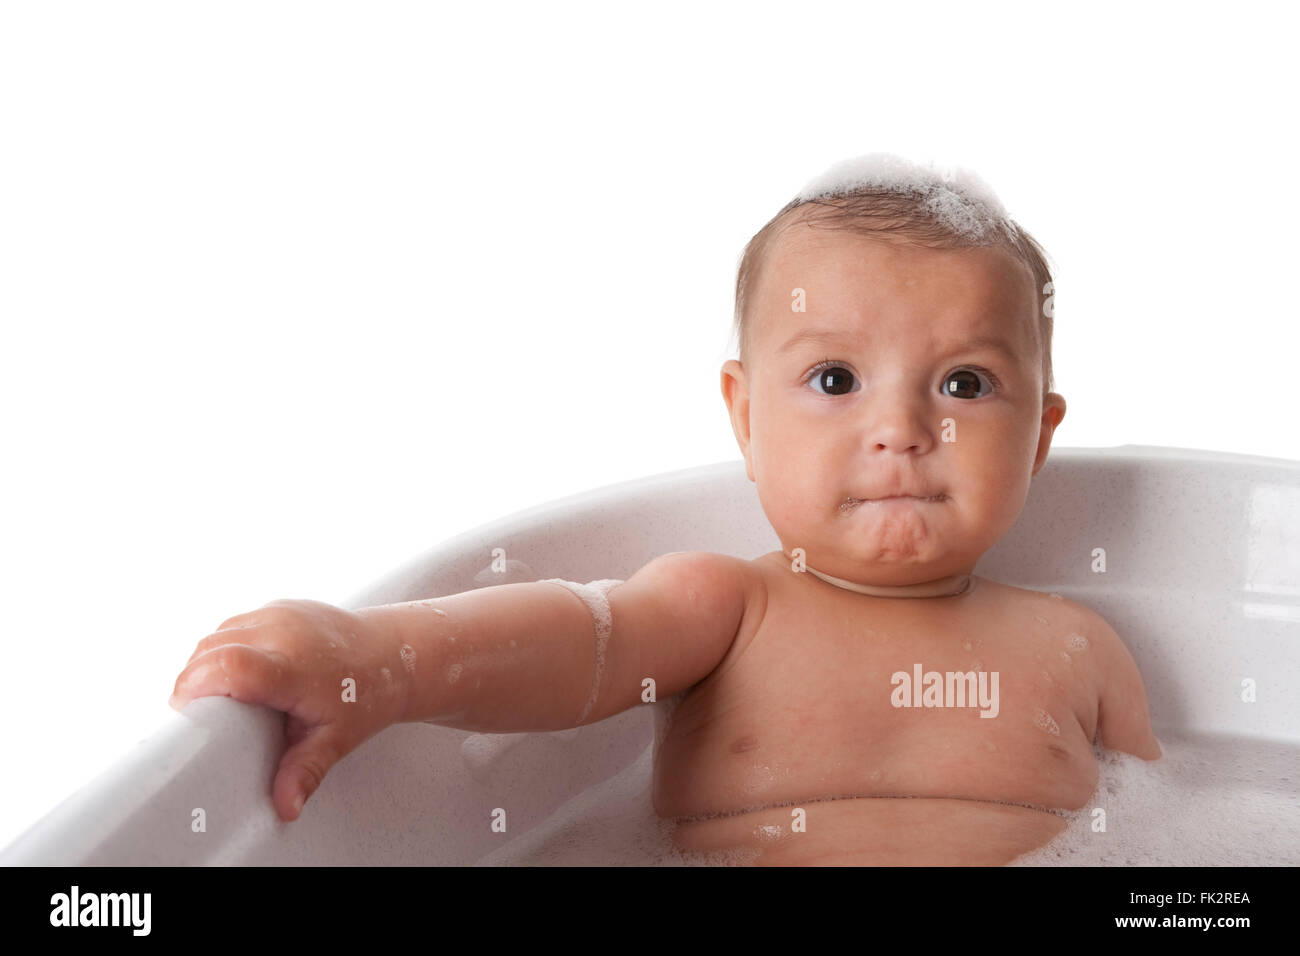 Baby girl sitting in a bathtub with foam on white background Stock Photo